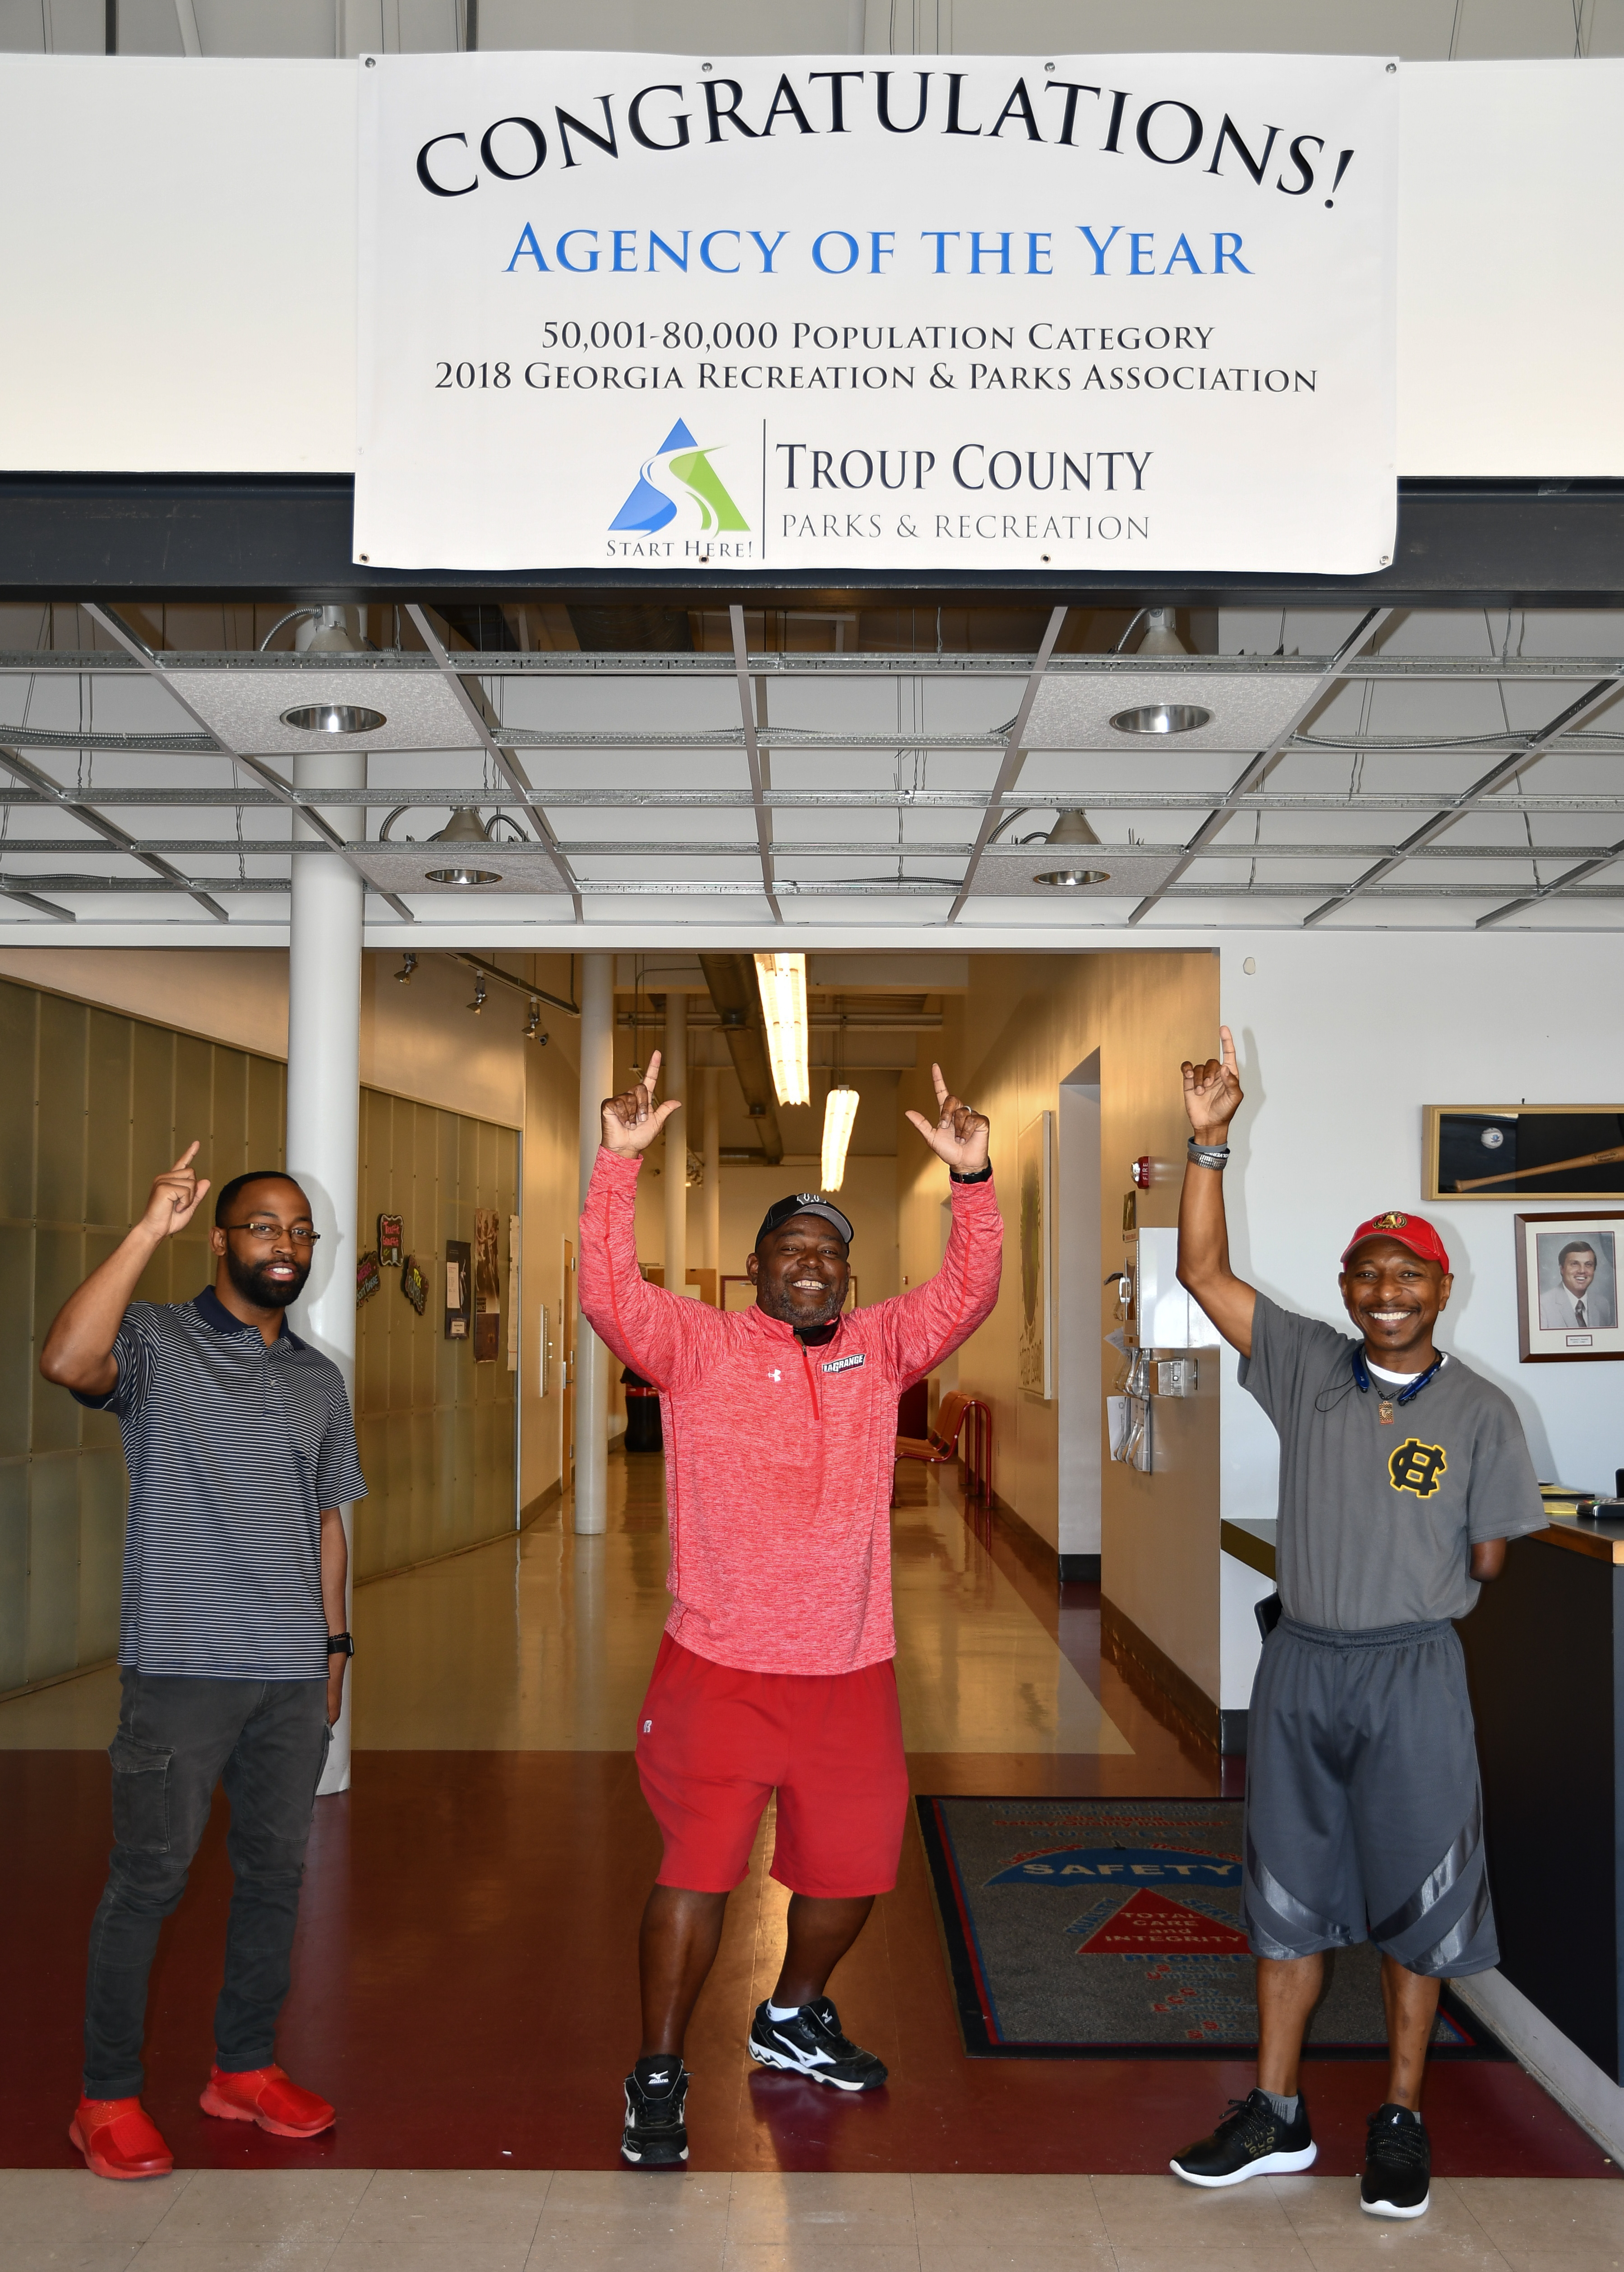 agency of the year - troup county ga parks and recreation, employees pose with agency of the year sign